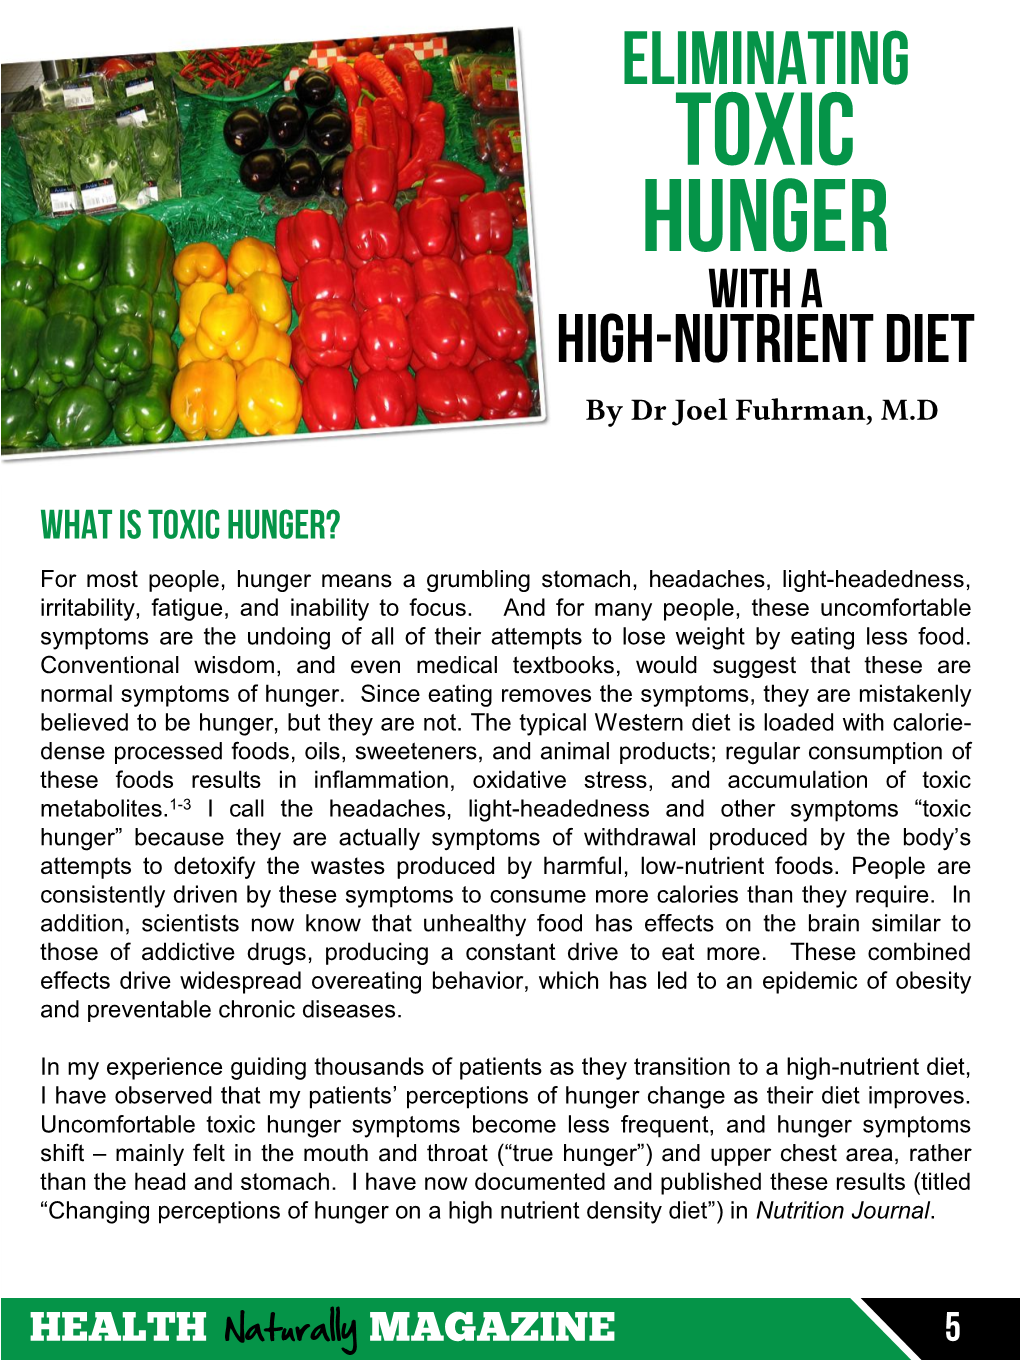 Eliminating Toxic Hunger with a High-Nutrient Diet by Dr Joel Fuhrman, M.D